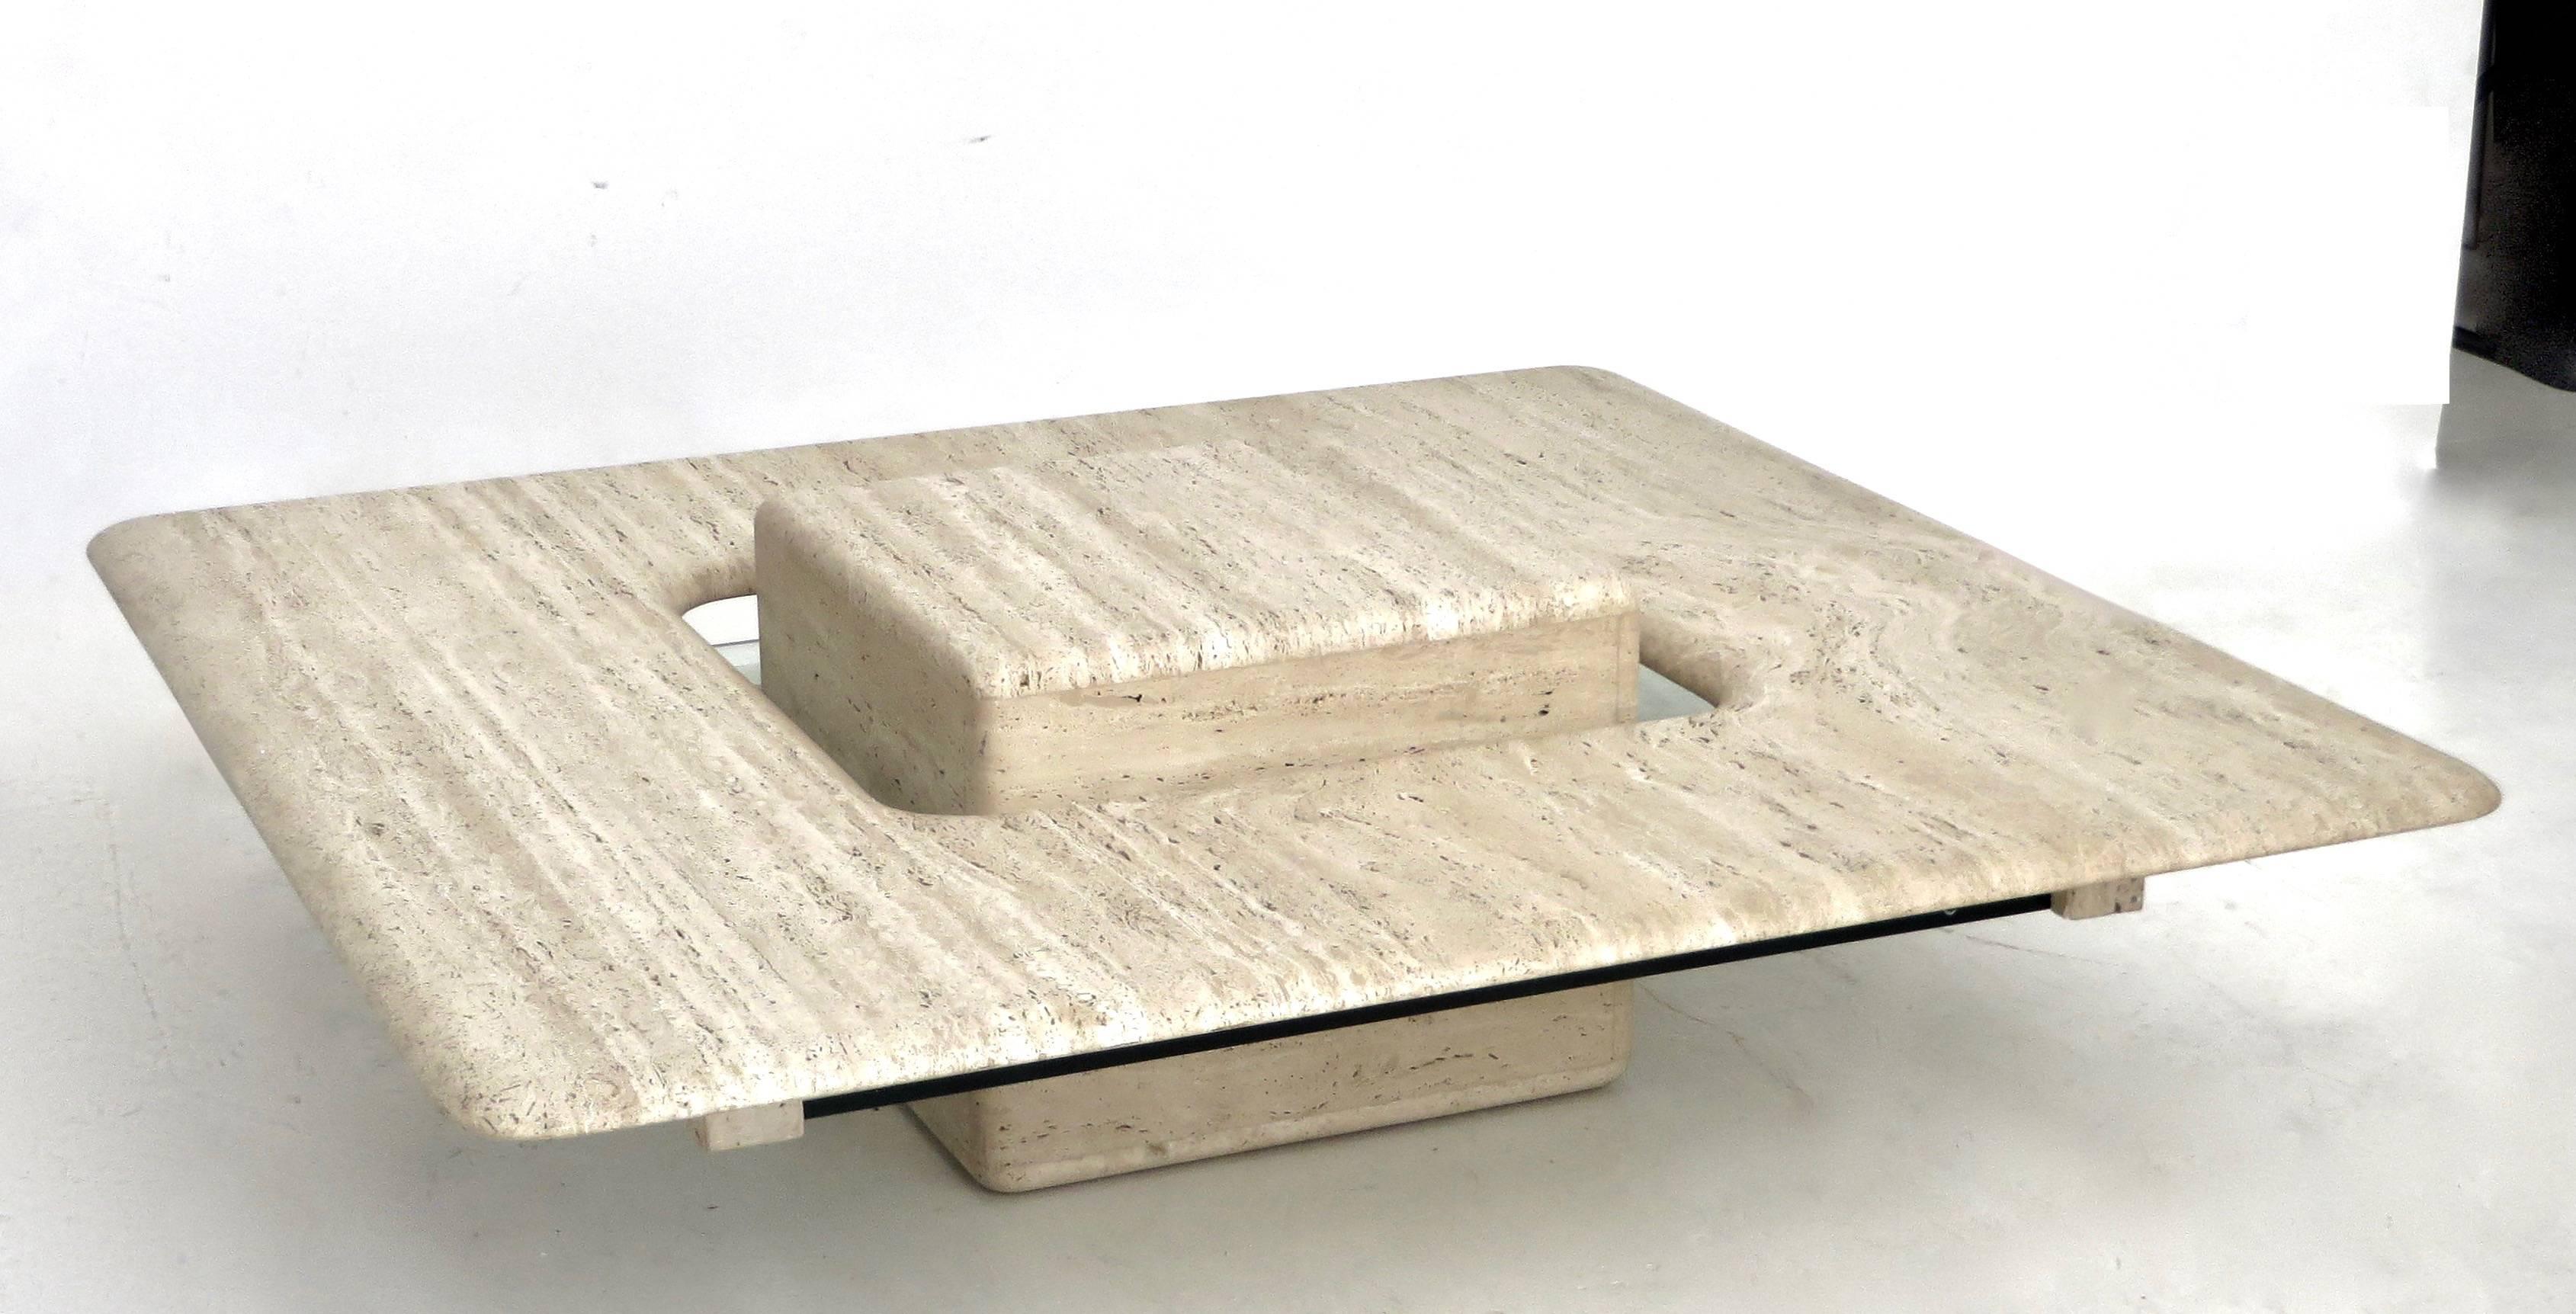 Late 20th Century French Travertine Minimalist Low Coffee Table with Floating Cube circa 1970